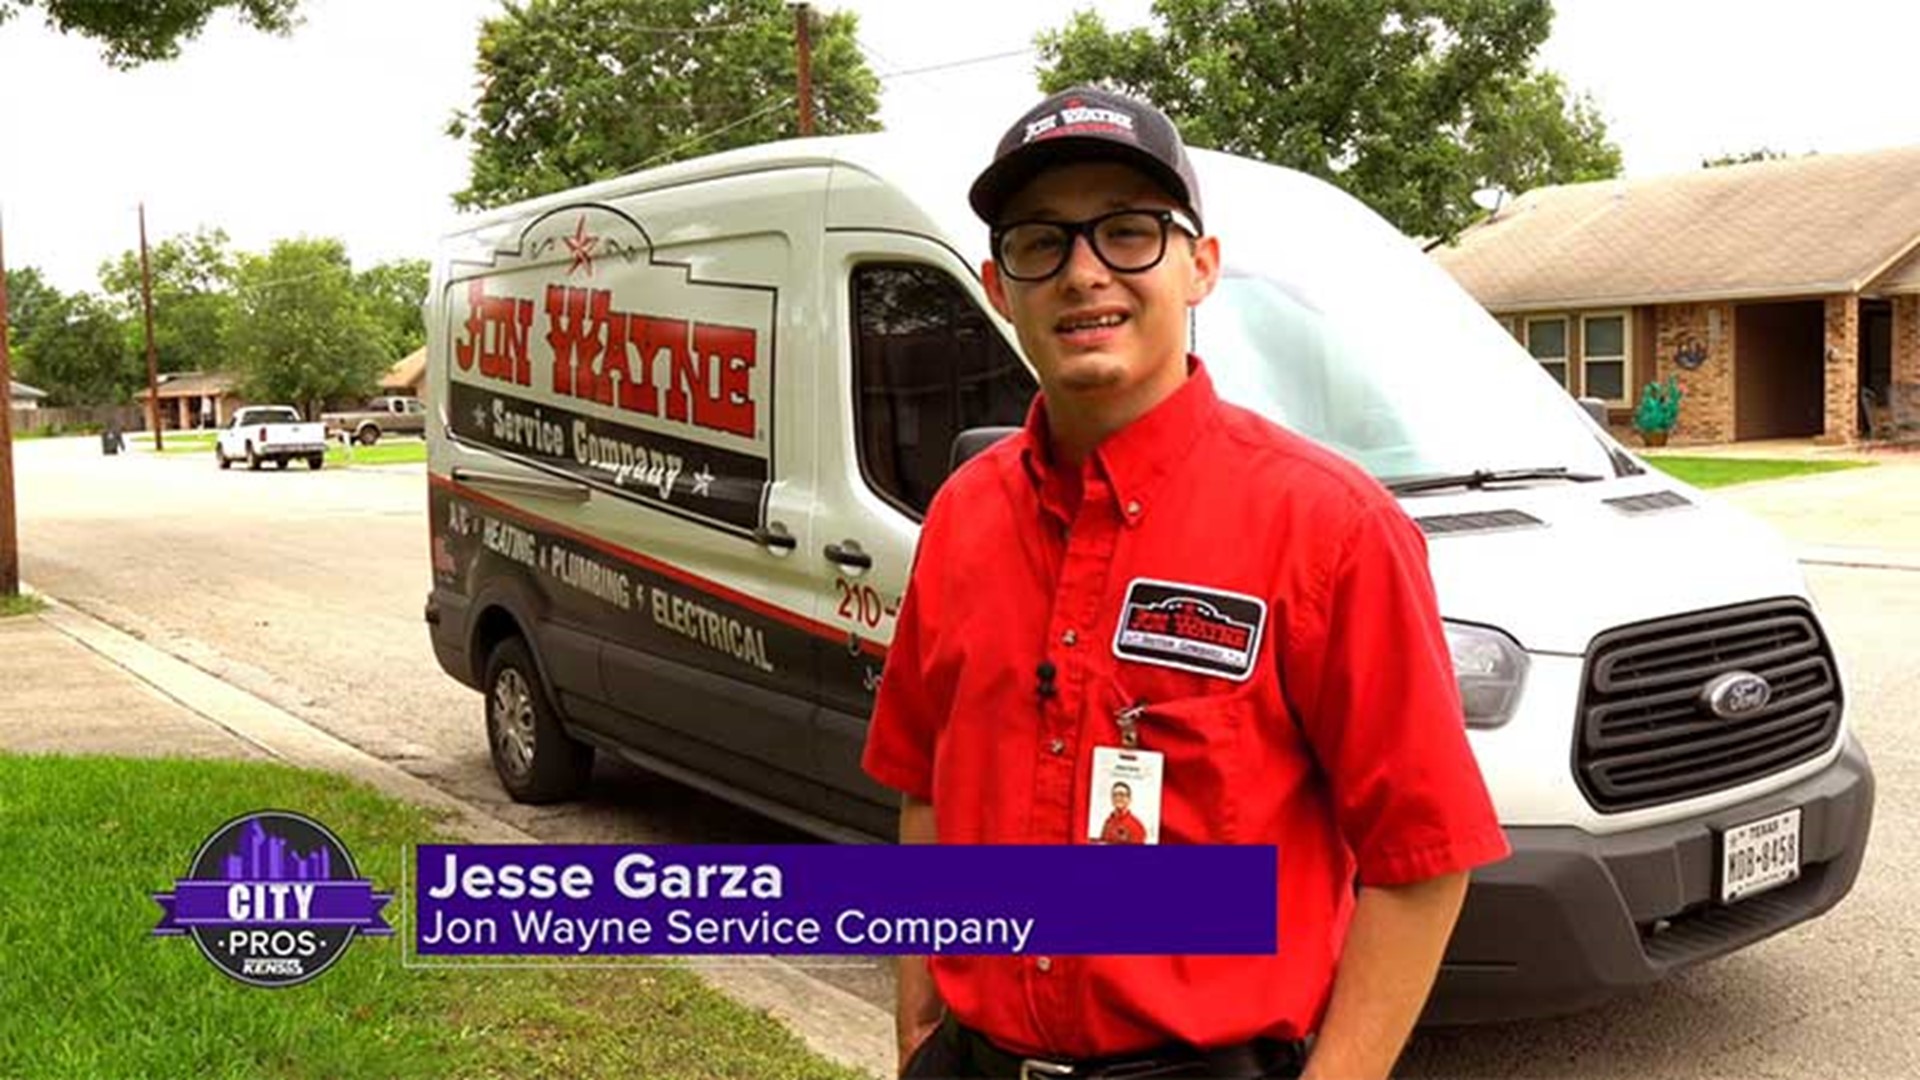 Jon Wayne Service Company will make sure your system is prepared to work efficiently all summer long.